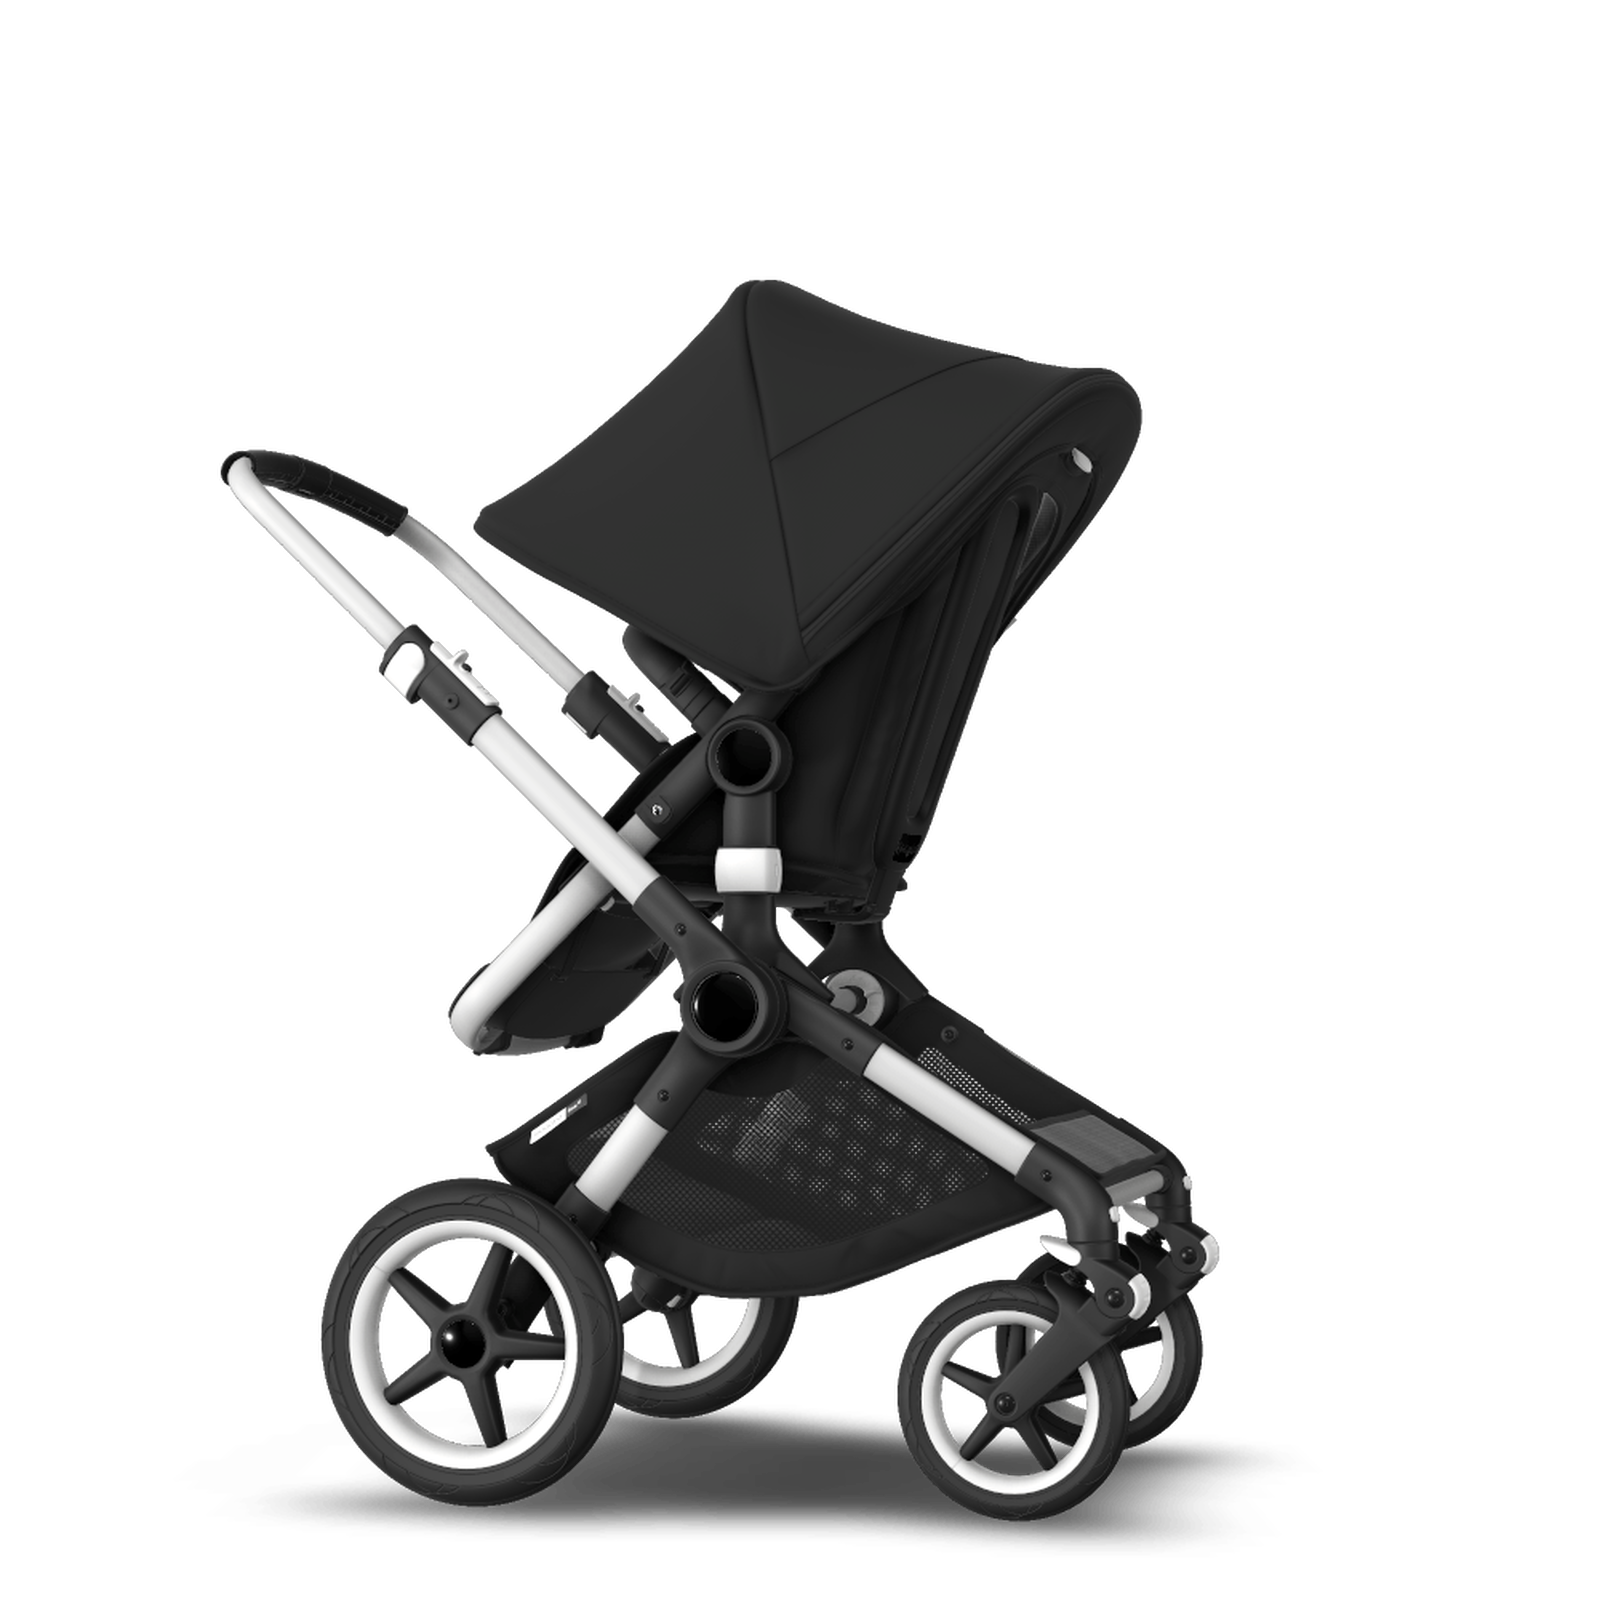 Bugaboo Travel System andreasbydesign